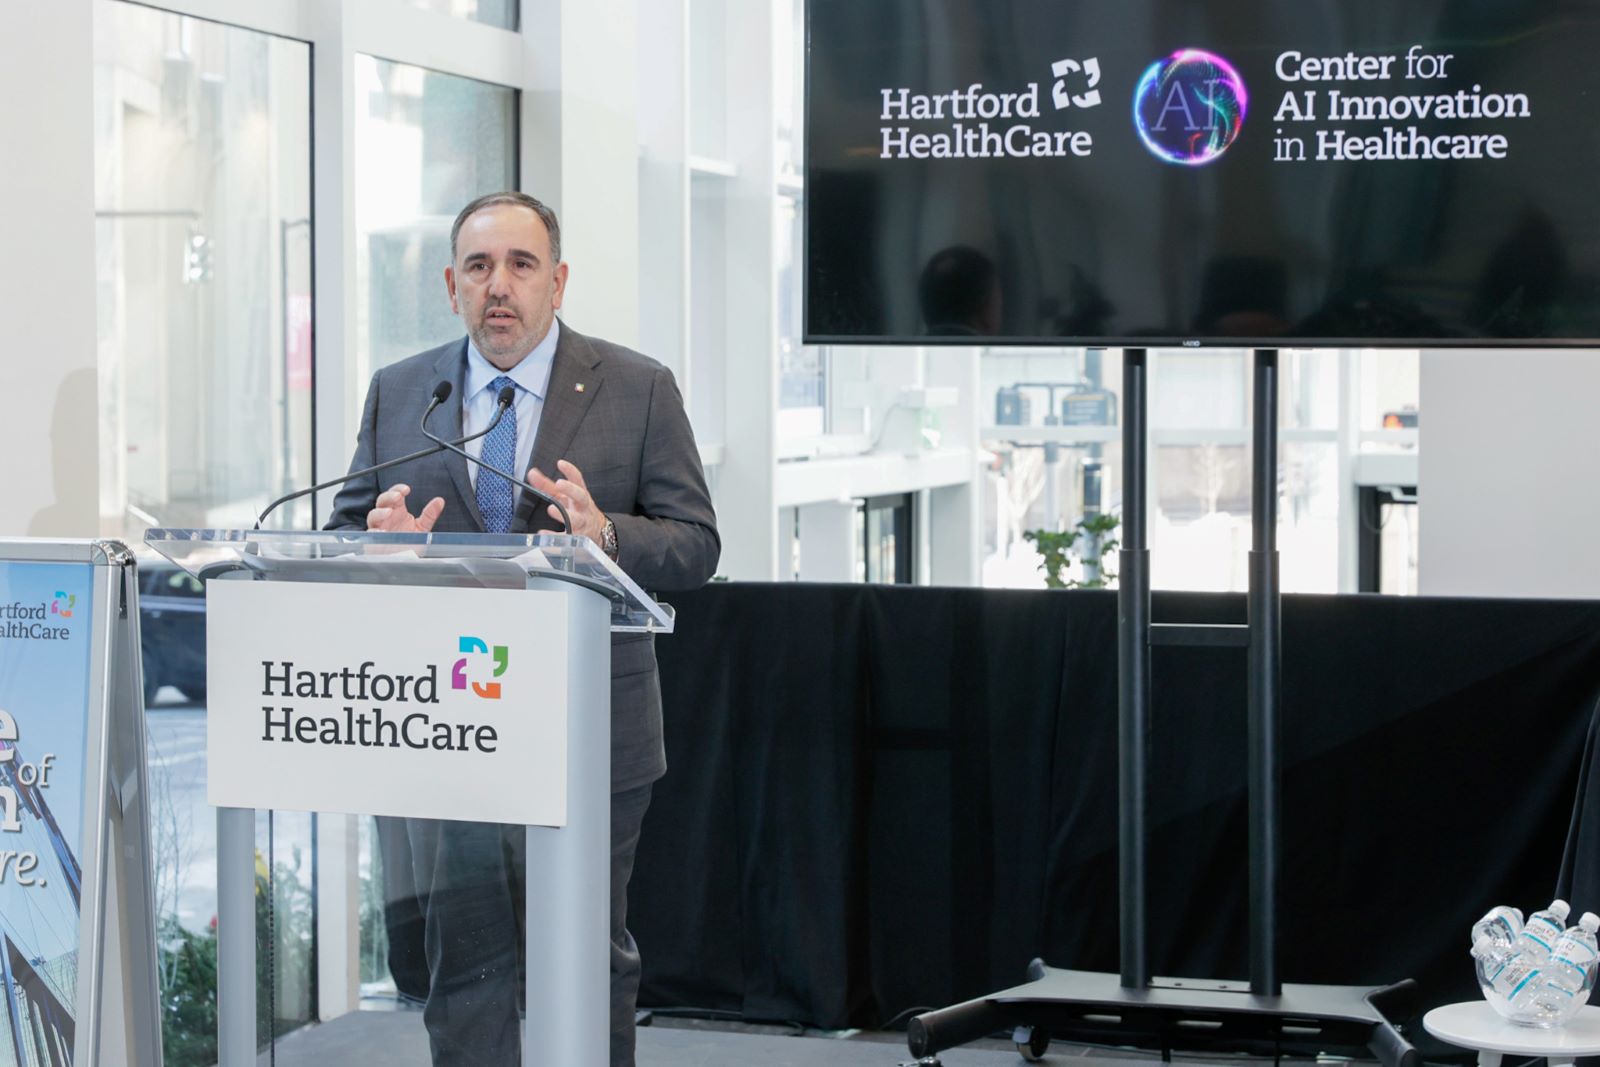 Hartford HealthCare Launches Center for AI Innovation in Healthcare